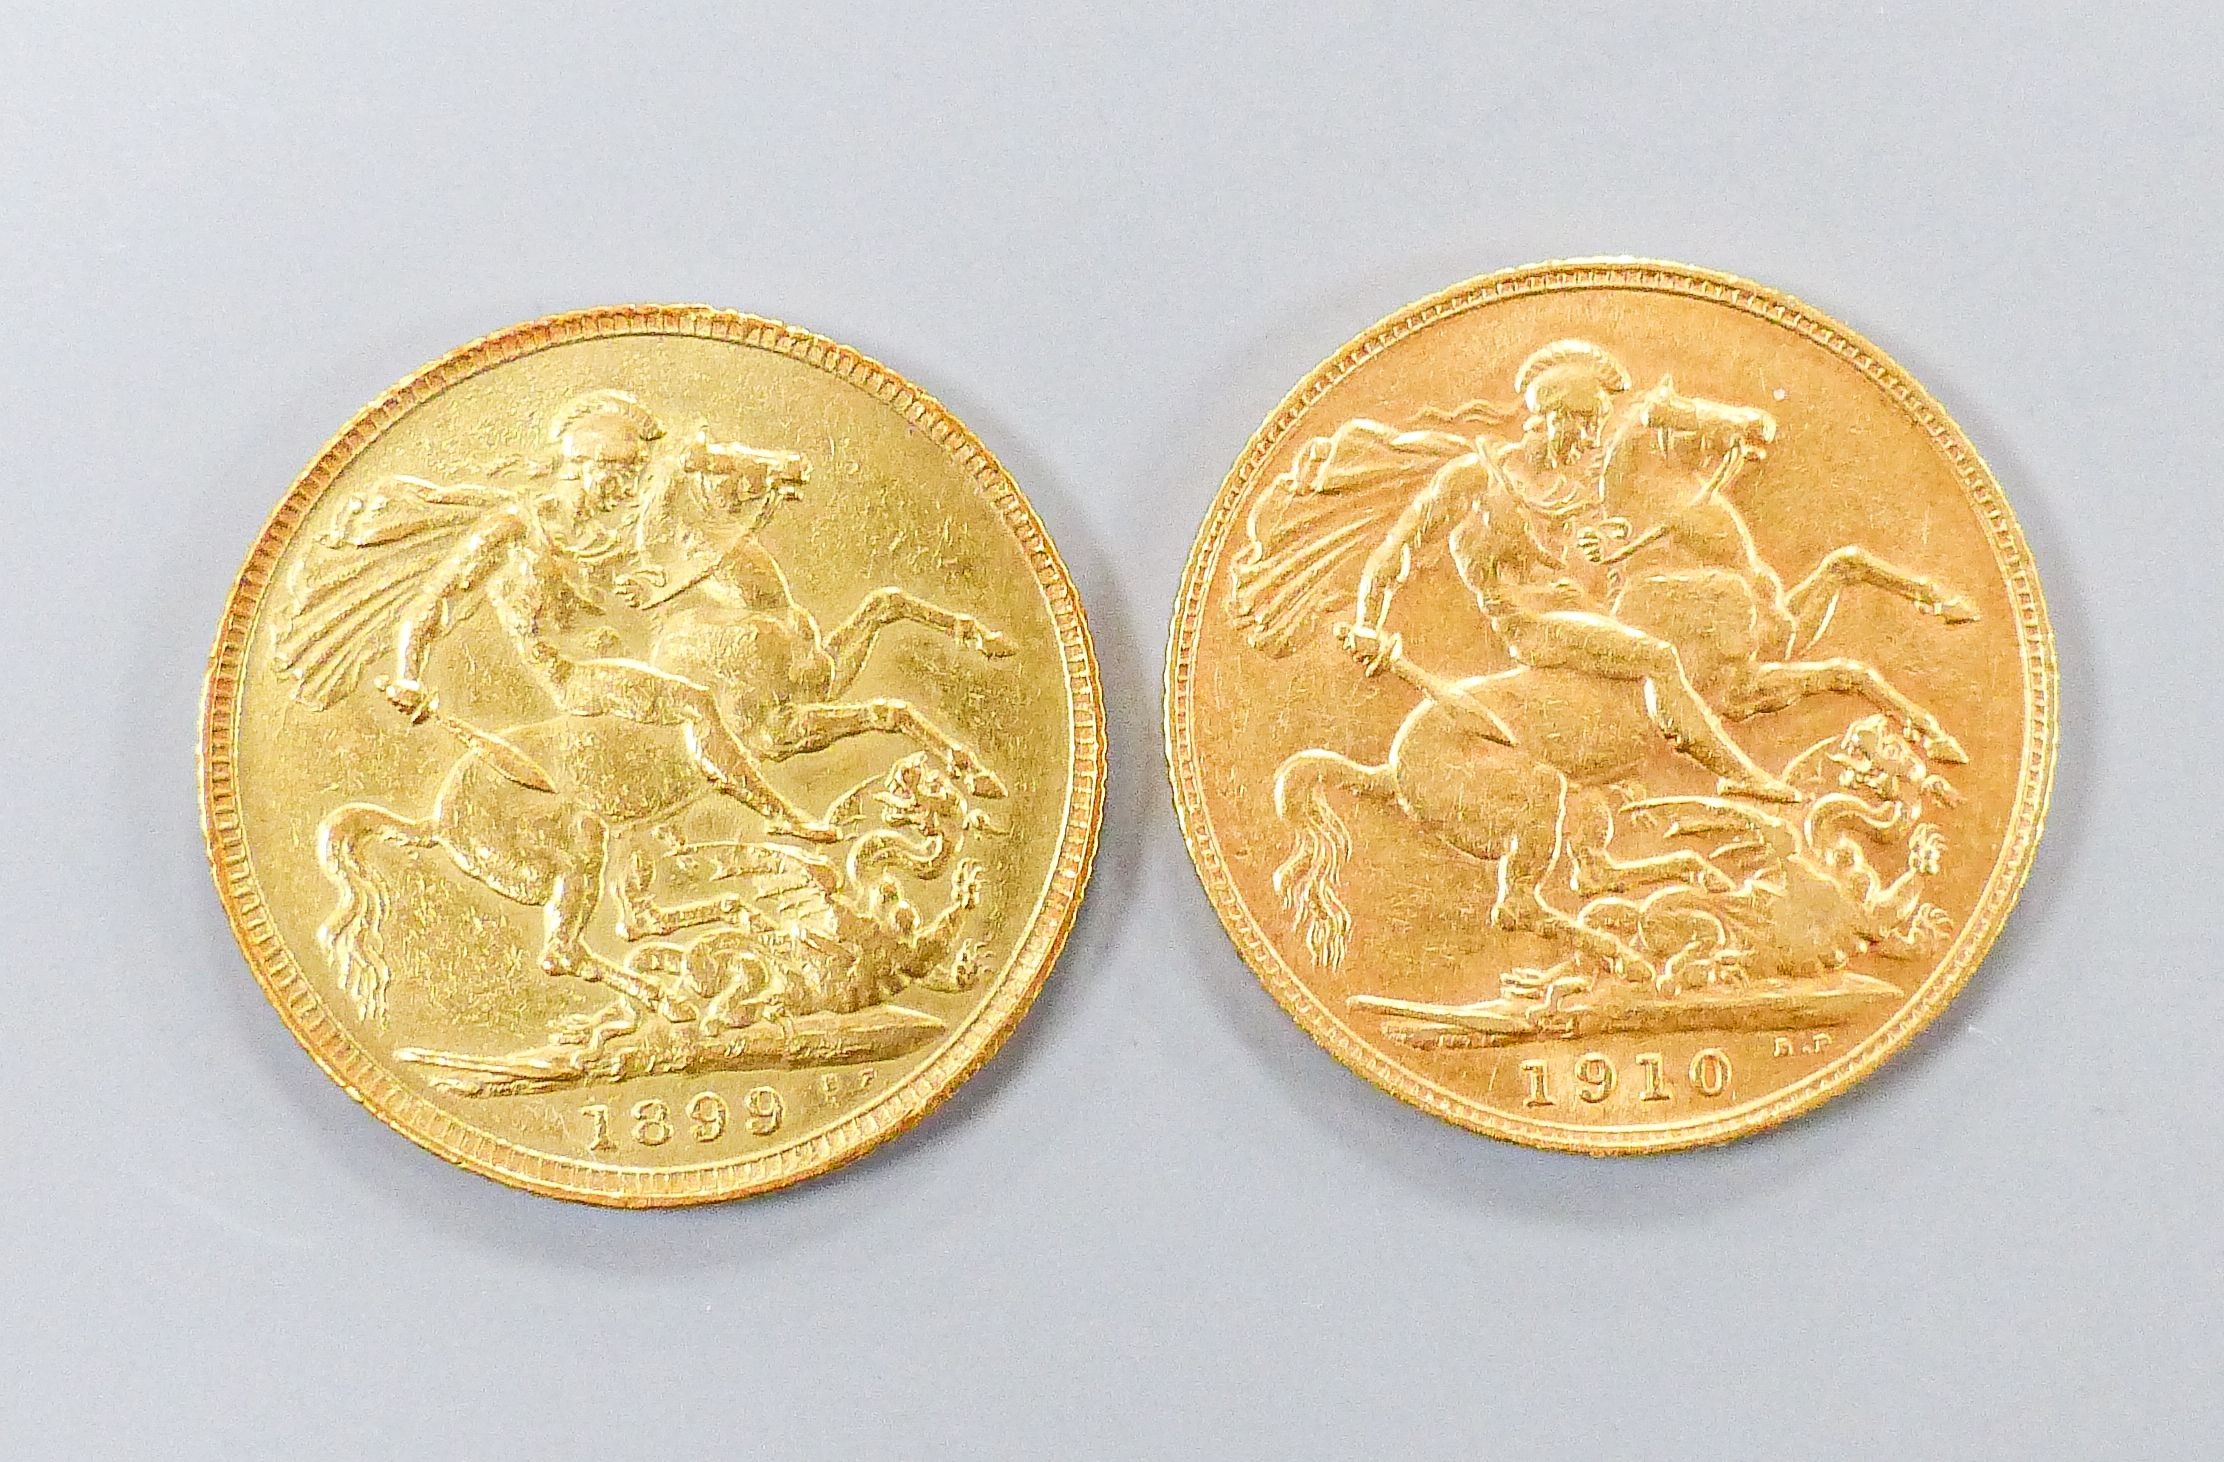 Two gold sovereigns, 1899 & 1910.